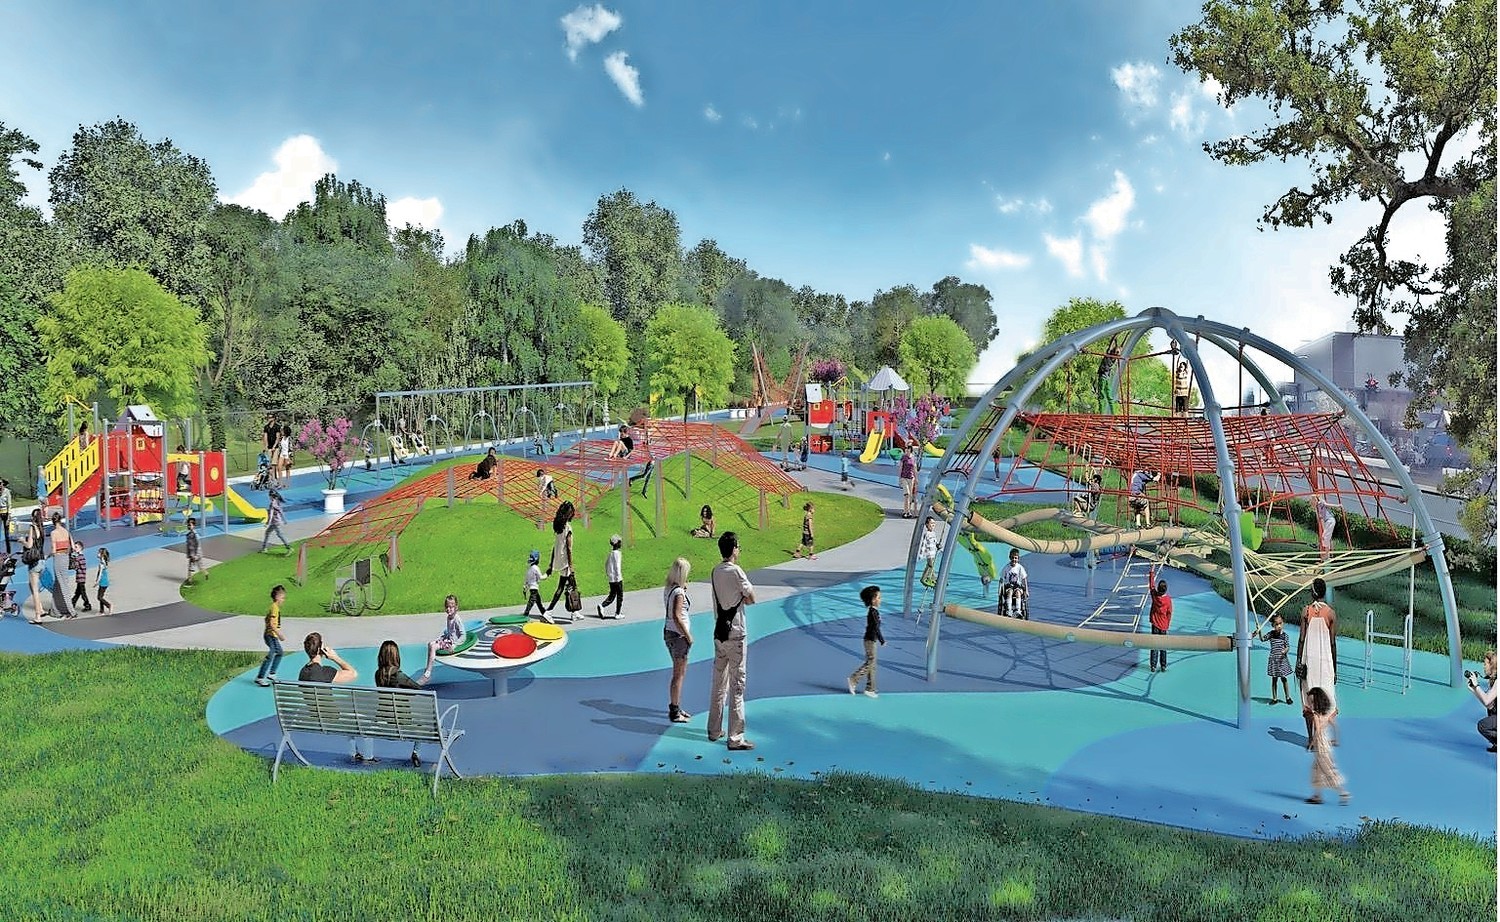 The playground proposed for Hickey Field, above, is one step closer to becoming a reality after State Sen. Todd Kaminsky helped secure a $500,000 grant for the project.